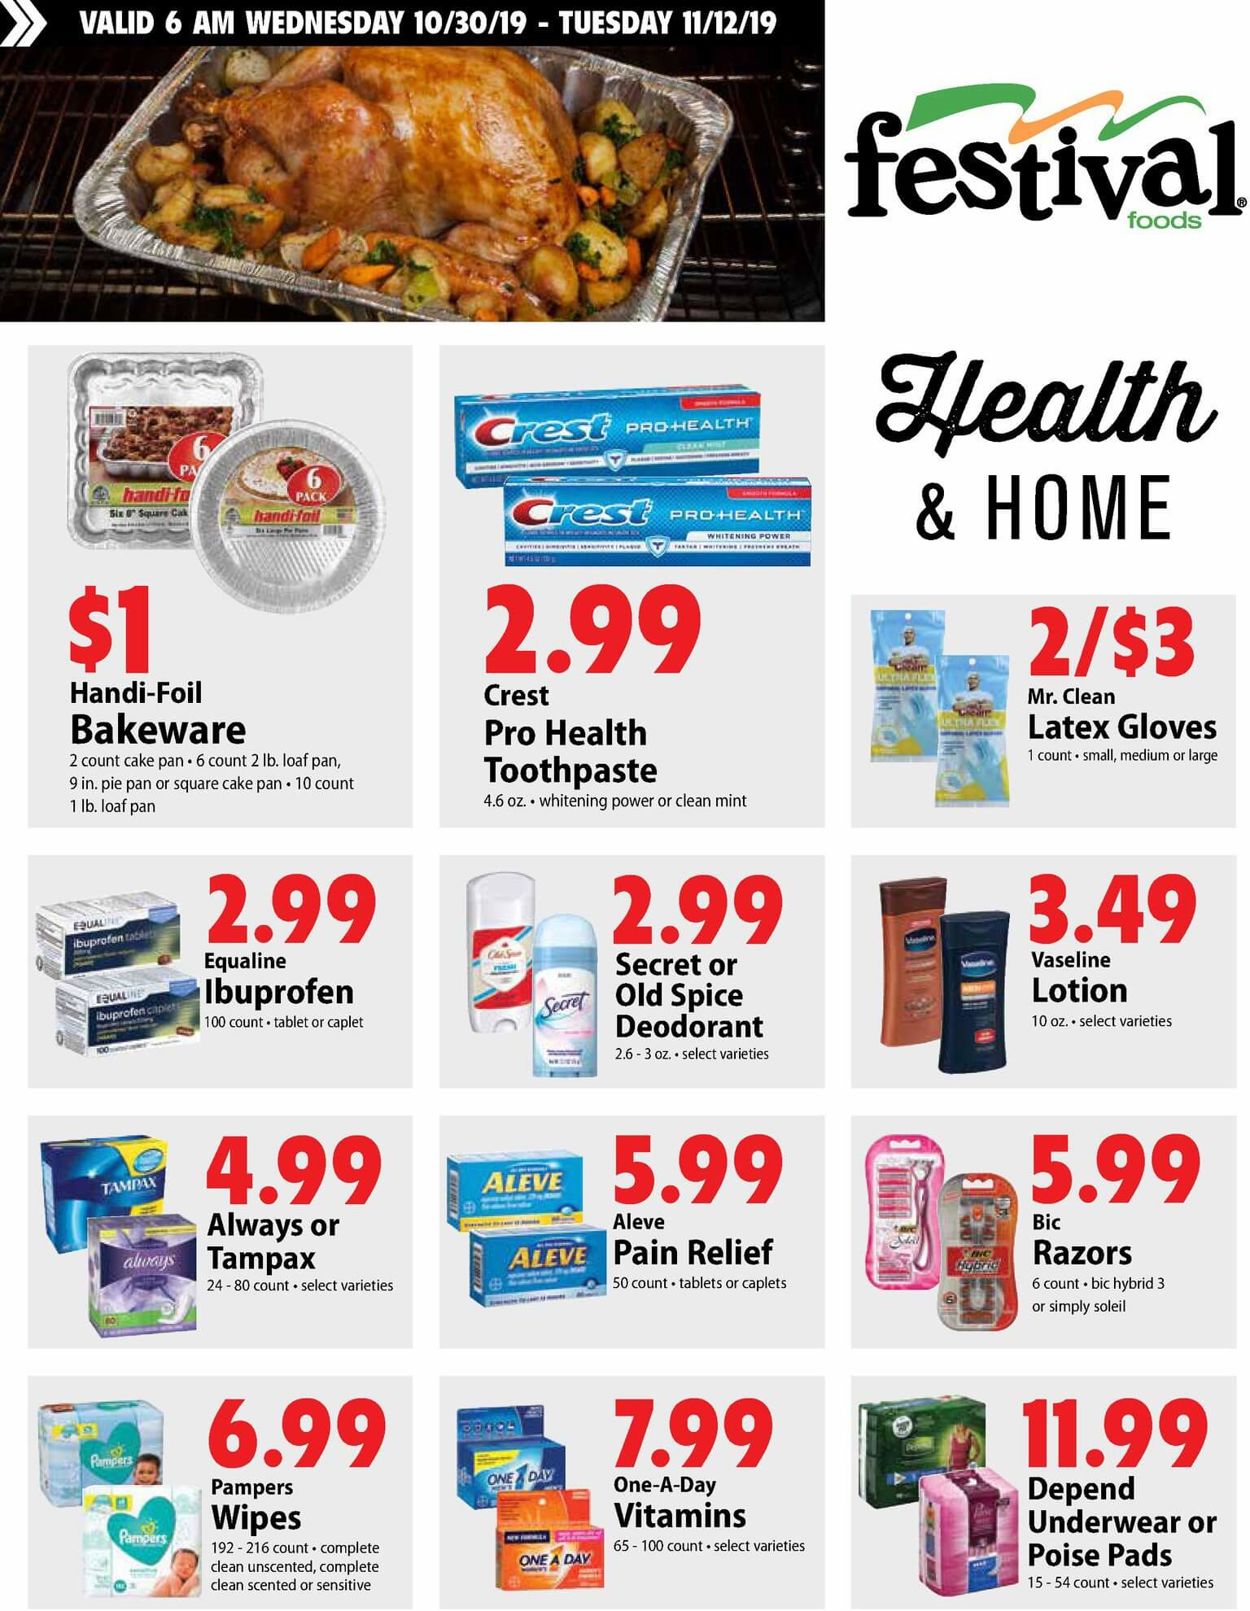 Festival Foods Current weekly ad 11/06 11/12/2019 [10]